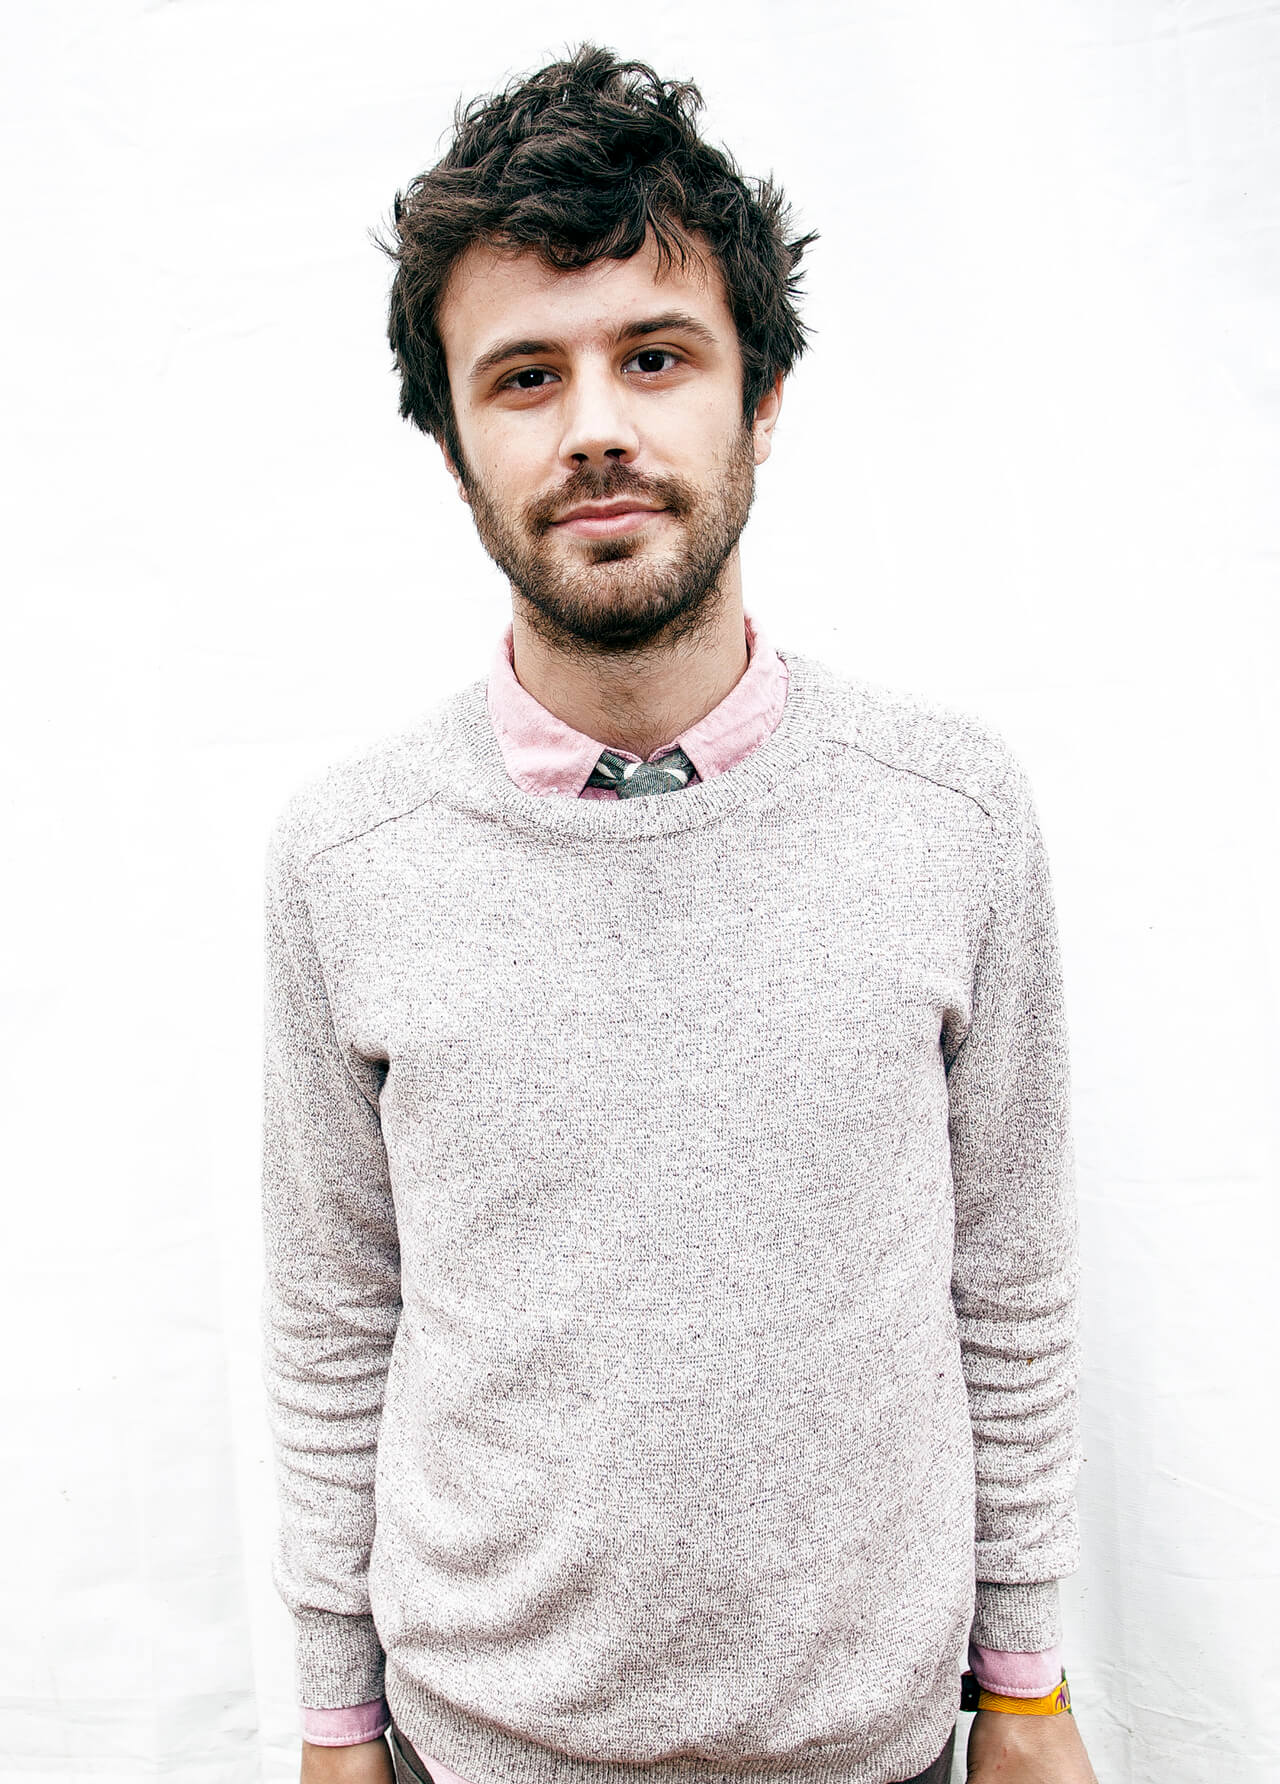 coming_out_2015_michael_angelakos_passion_pit